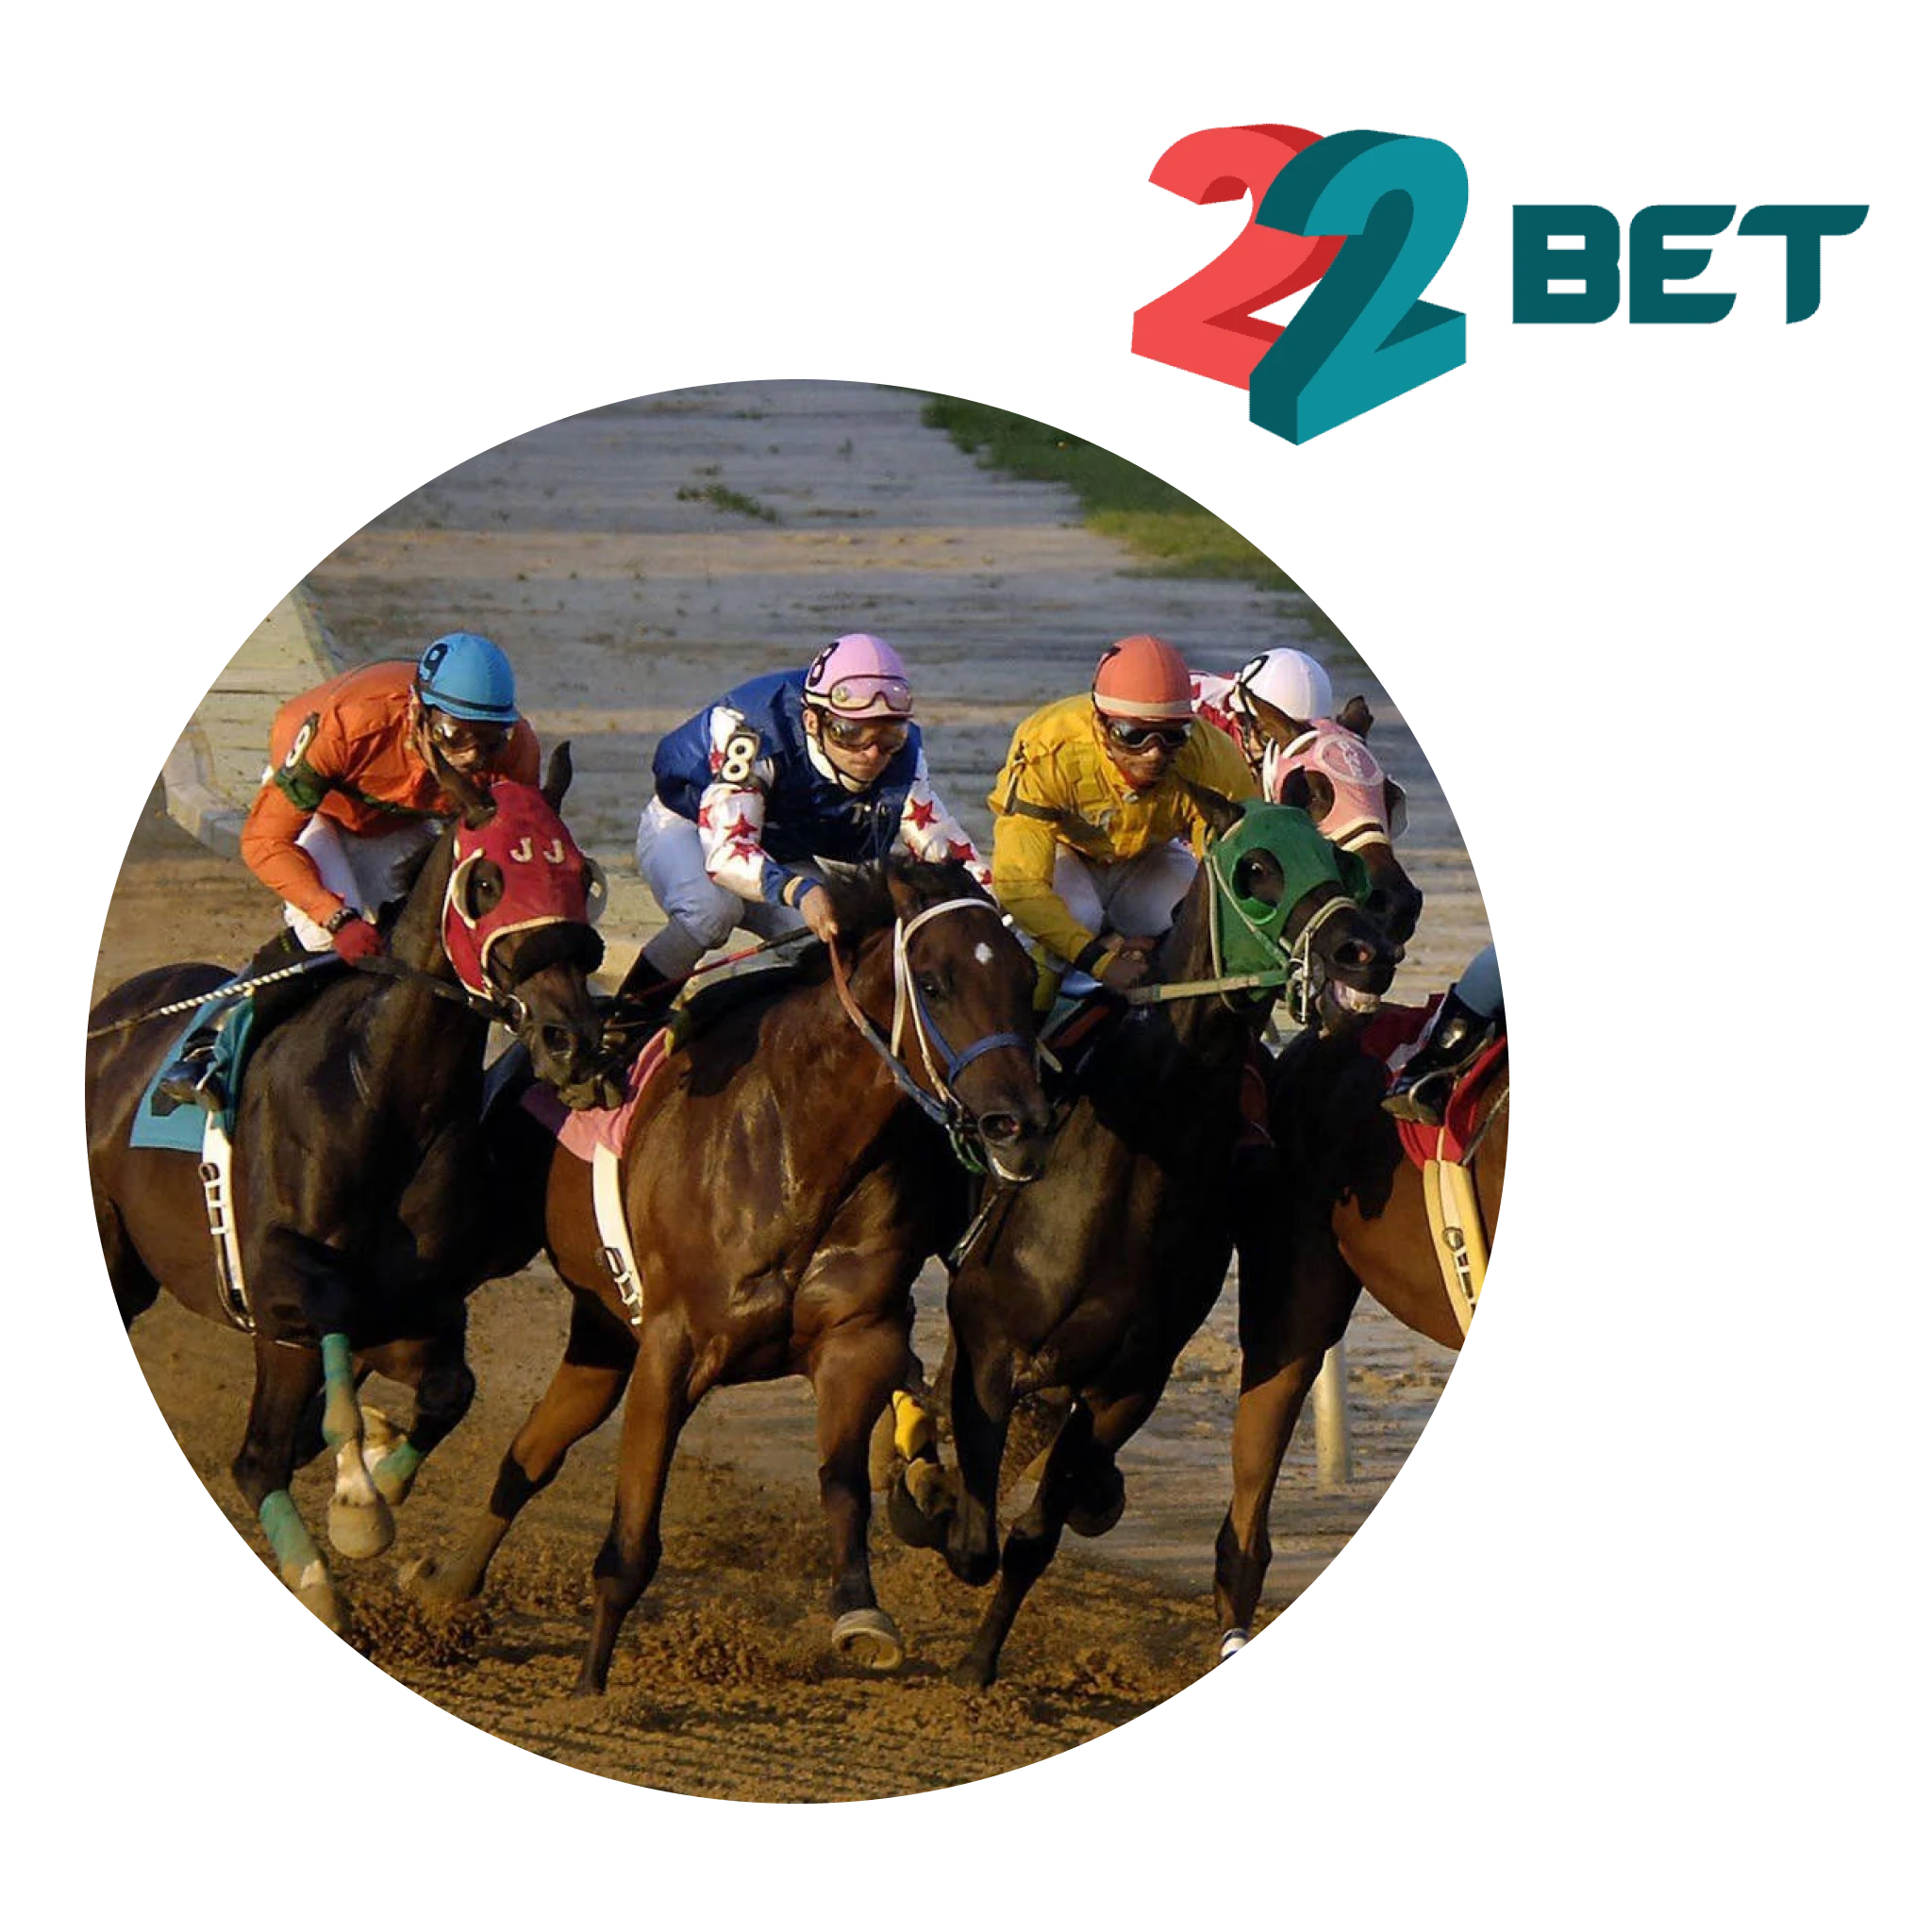 22bet provides many payment methods to horse racing betting.